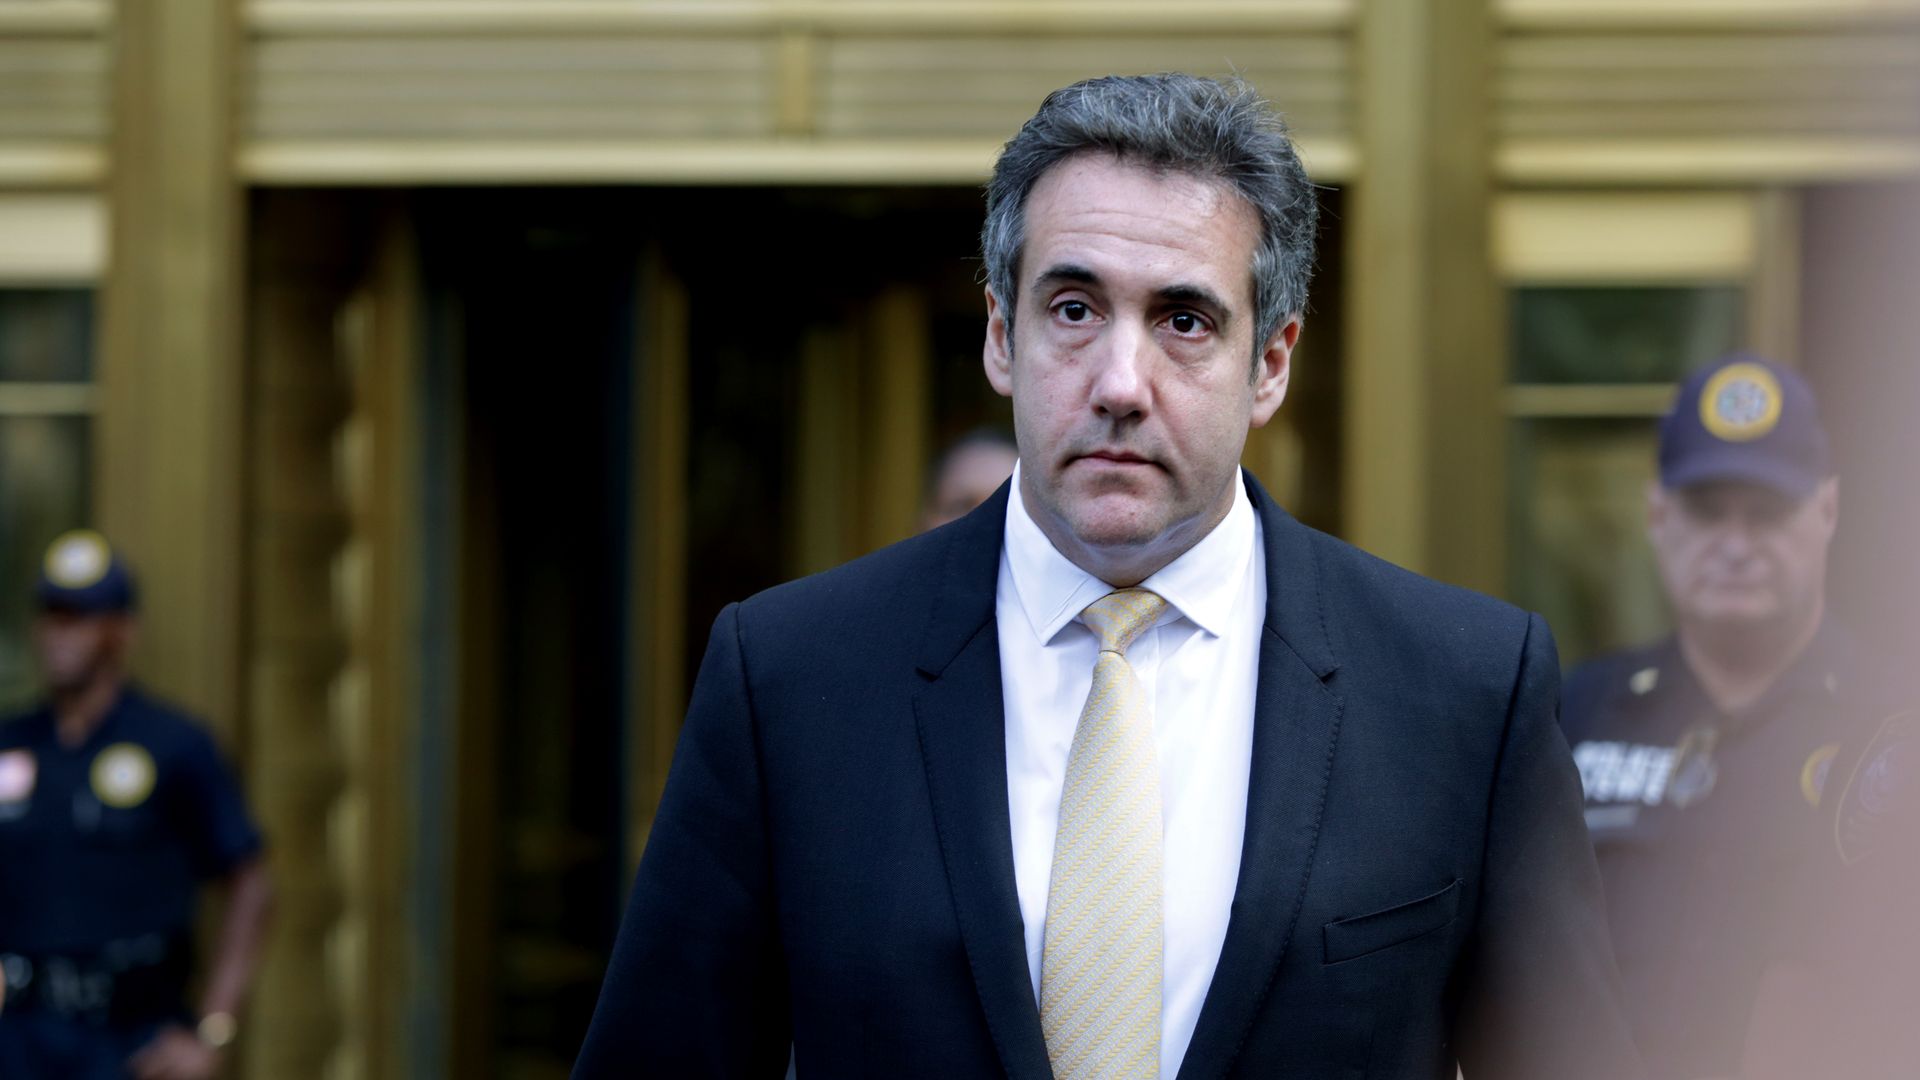 Michael Cohen, former lawyer to President Donald Trump. Photo: Yana Paskova/Getty Images